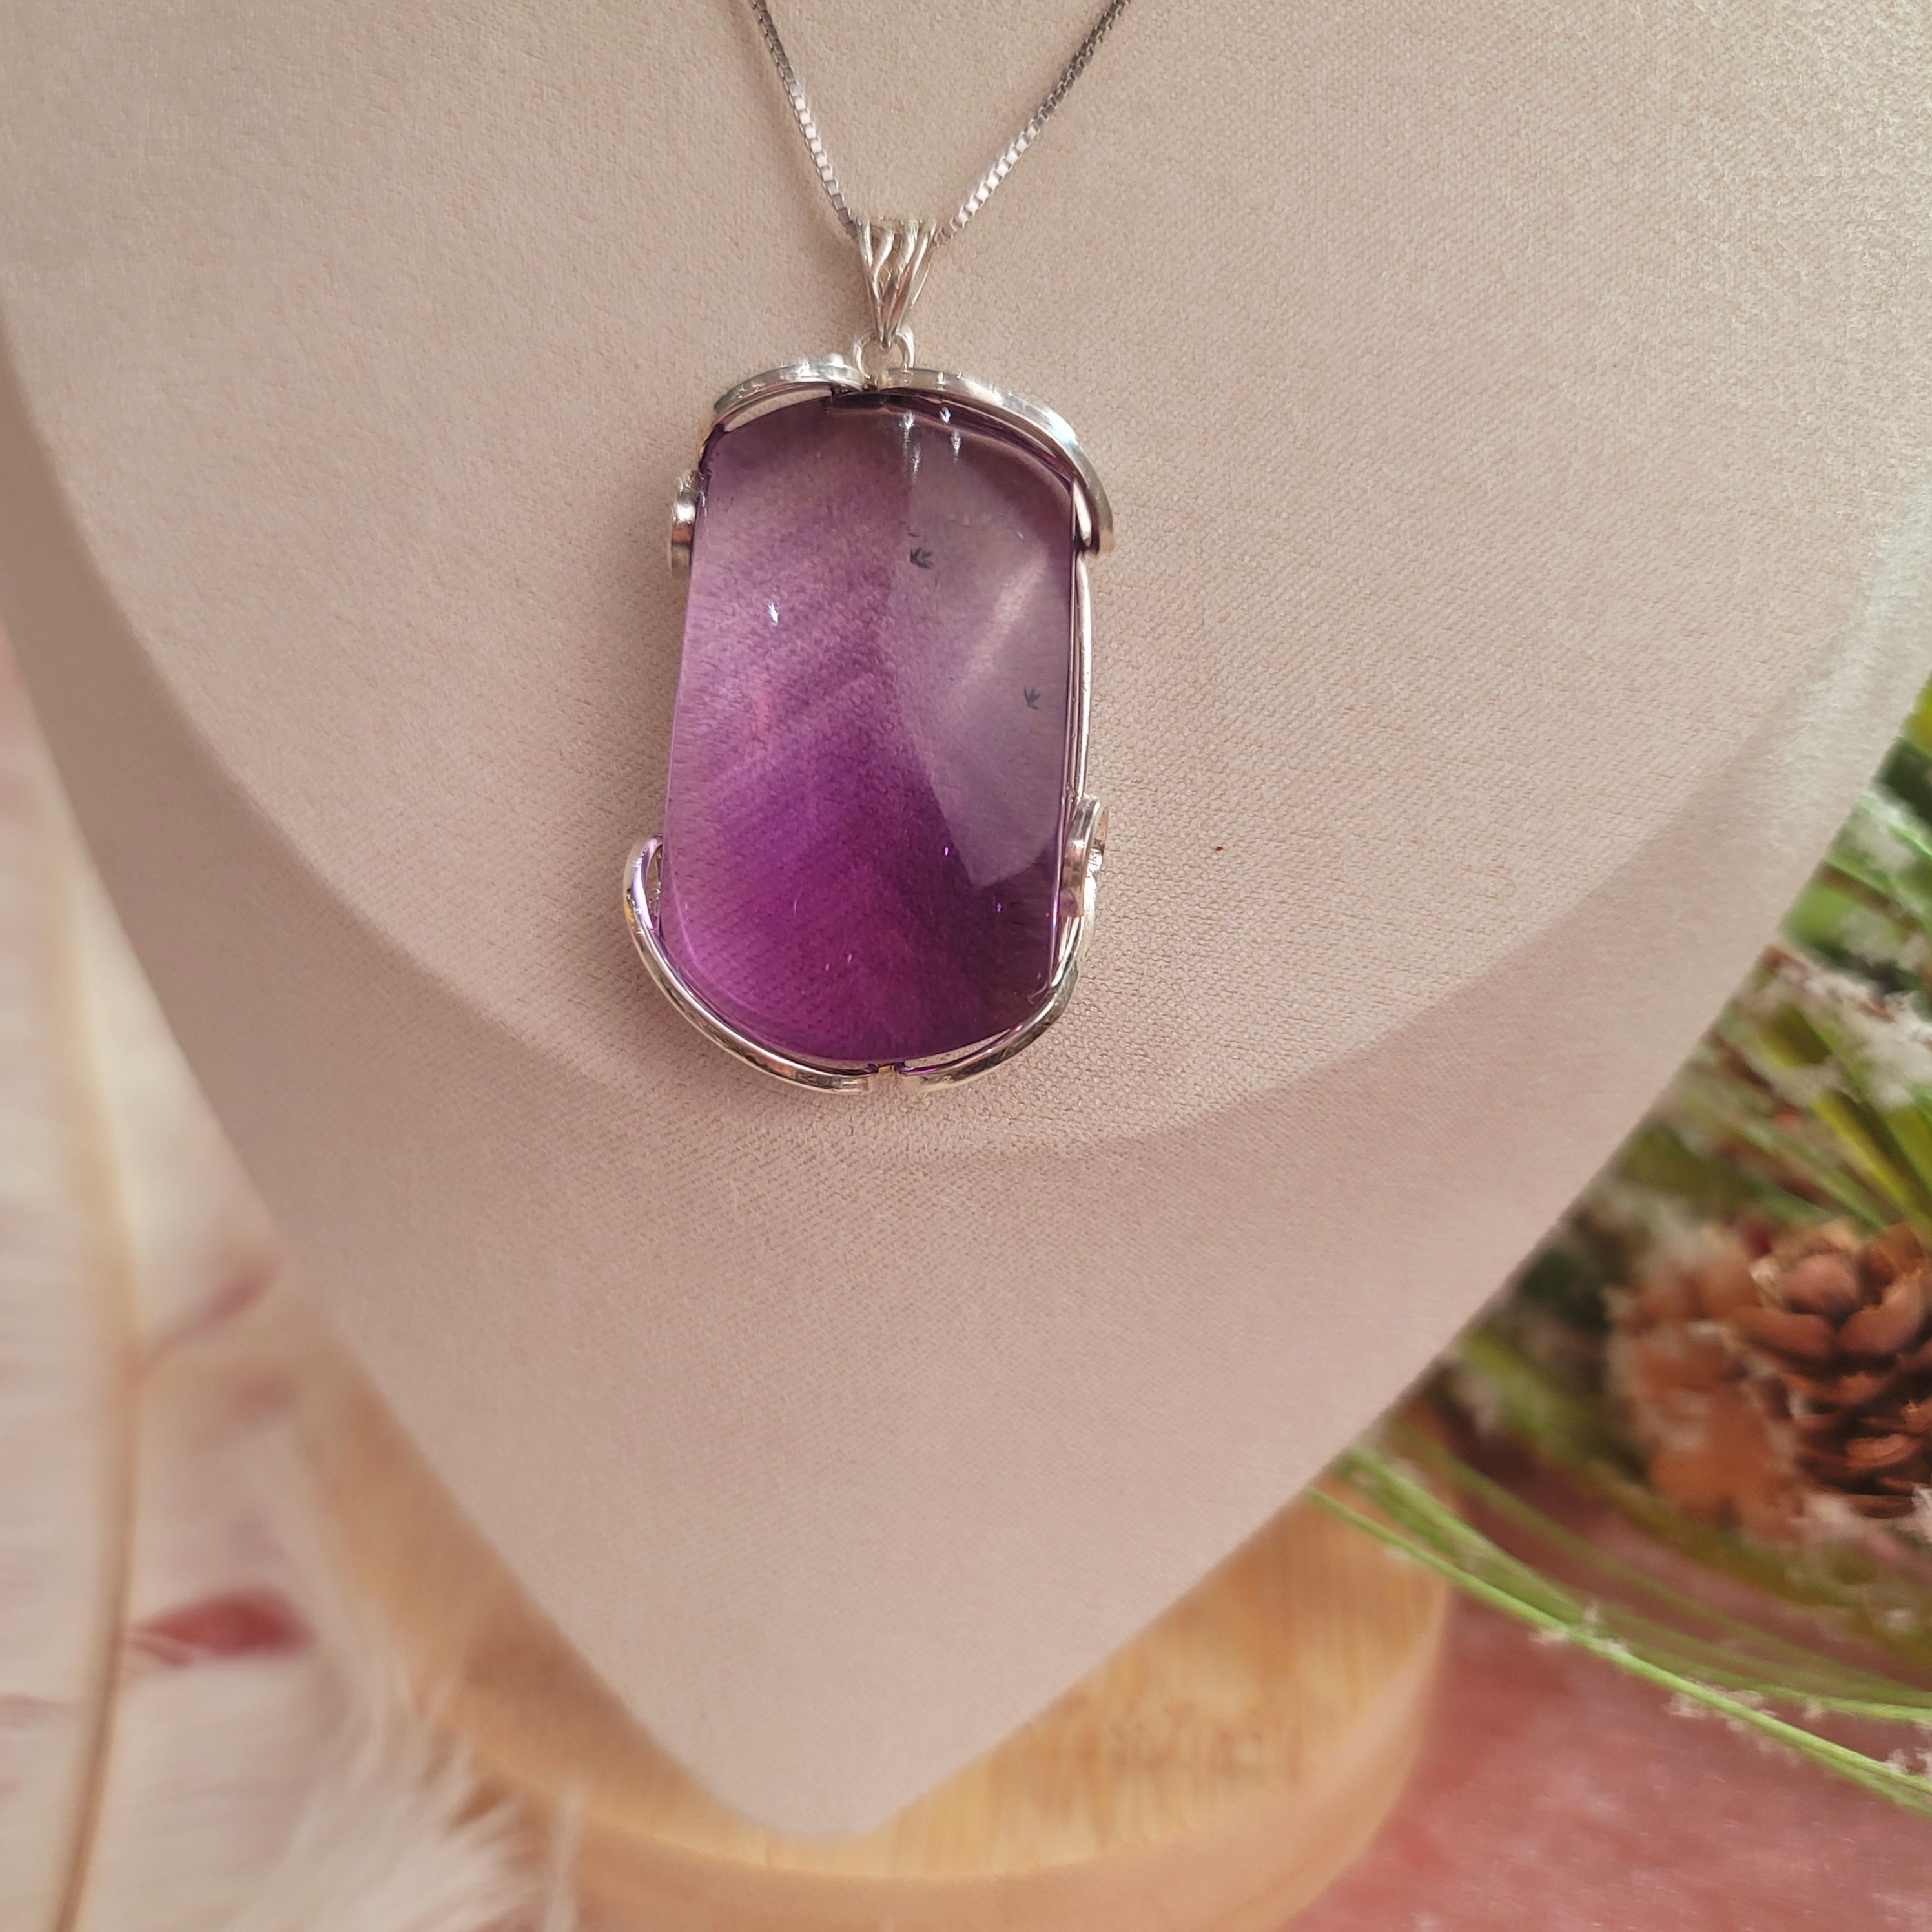 Amethyst with Hollandite Inclusion Necklace for Intuition and Protection